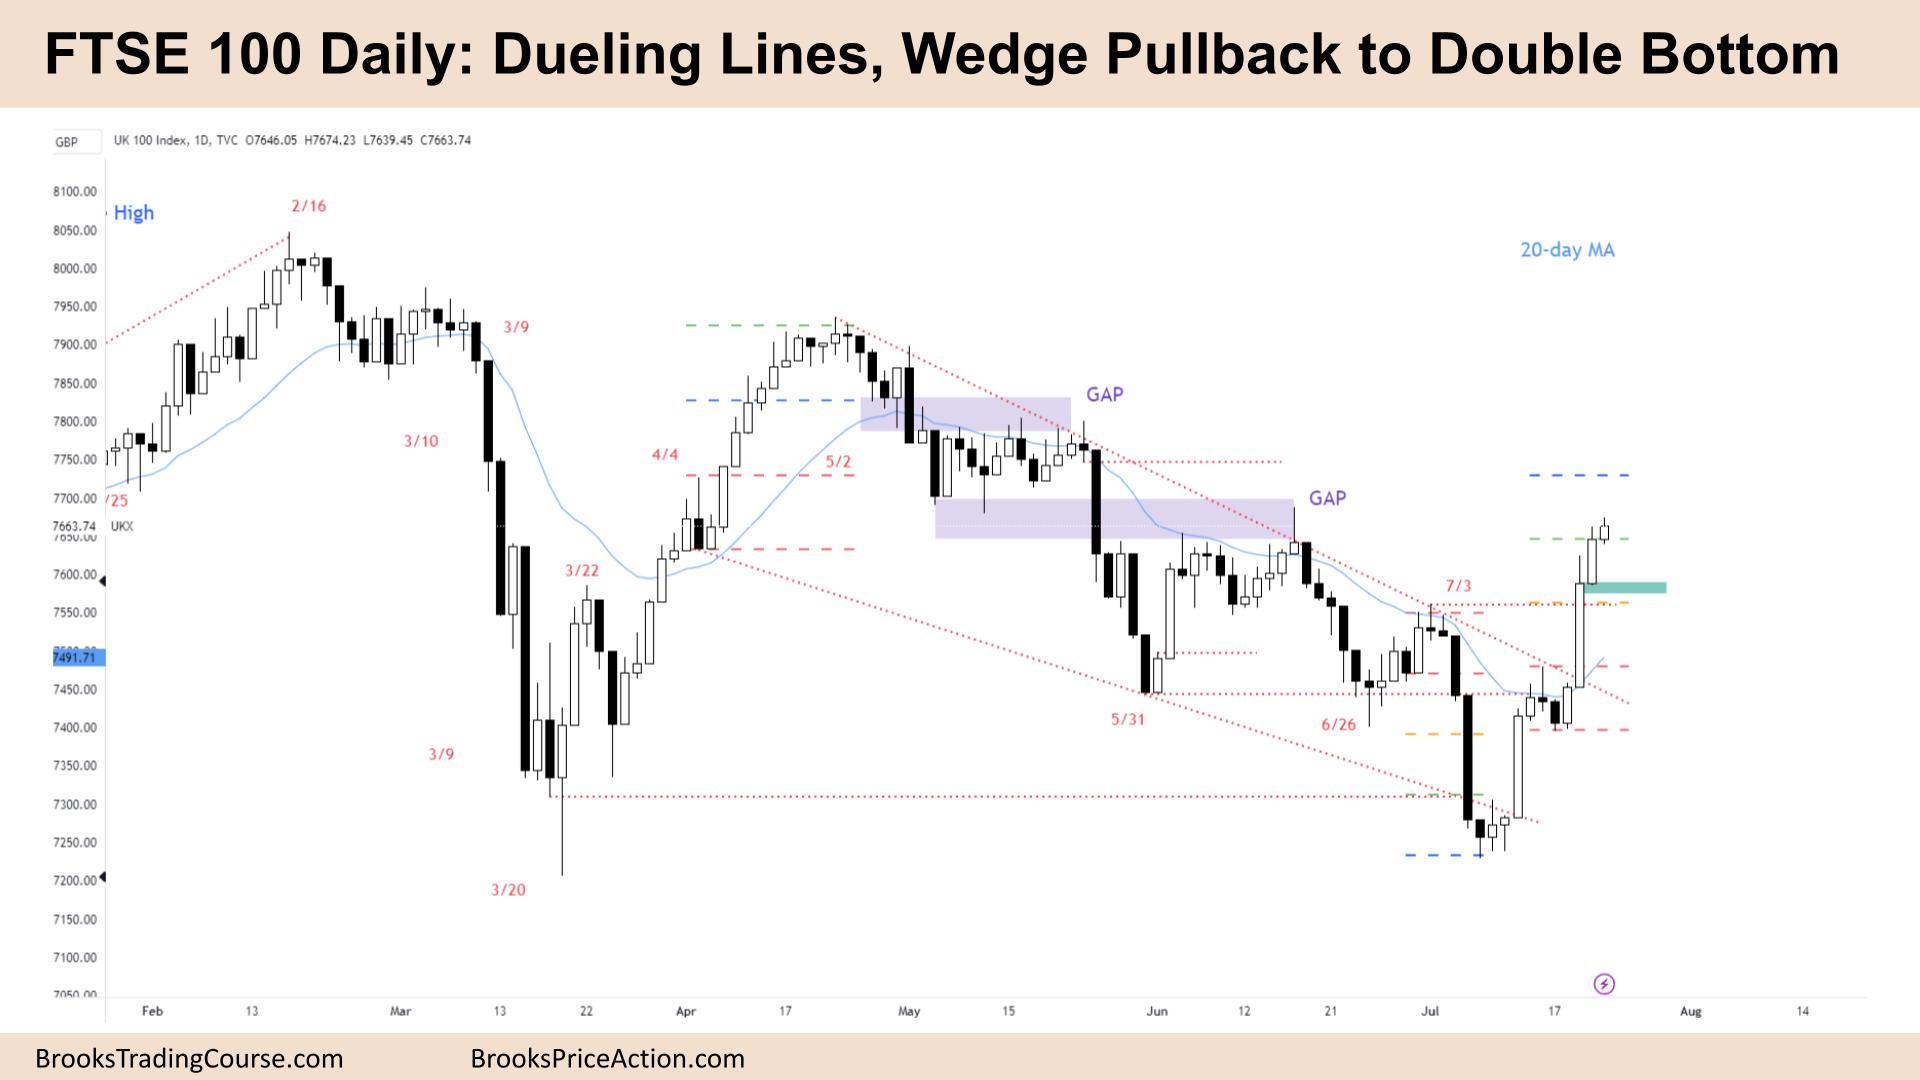 FTSE 100 Dueling Lines Wedge Pullback vers Double Bottom